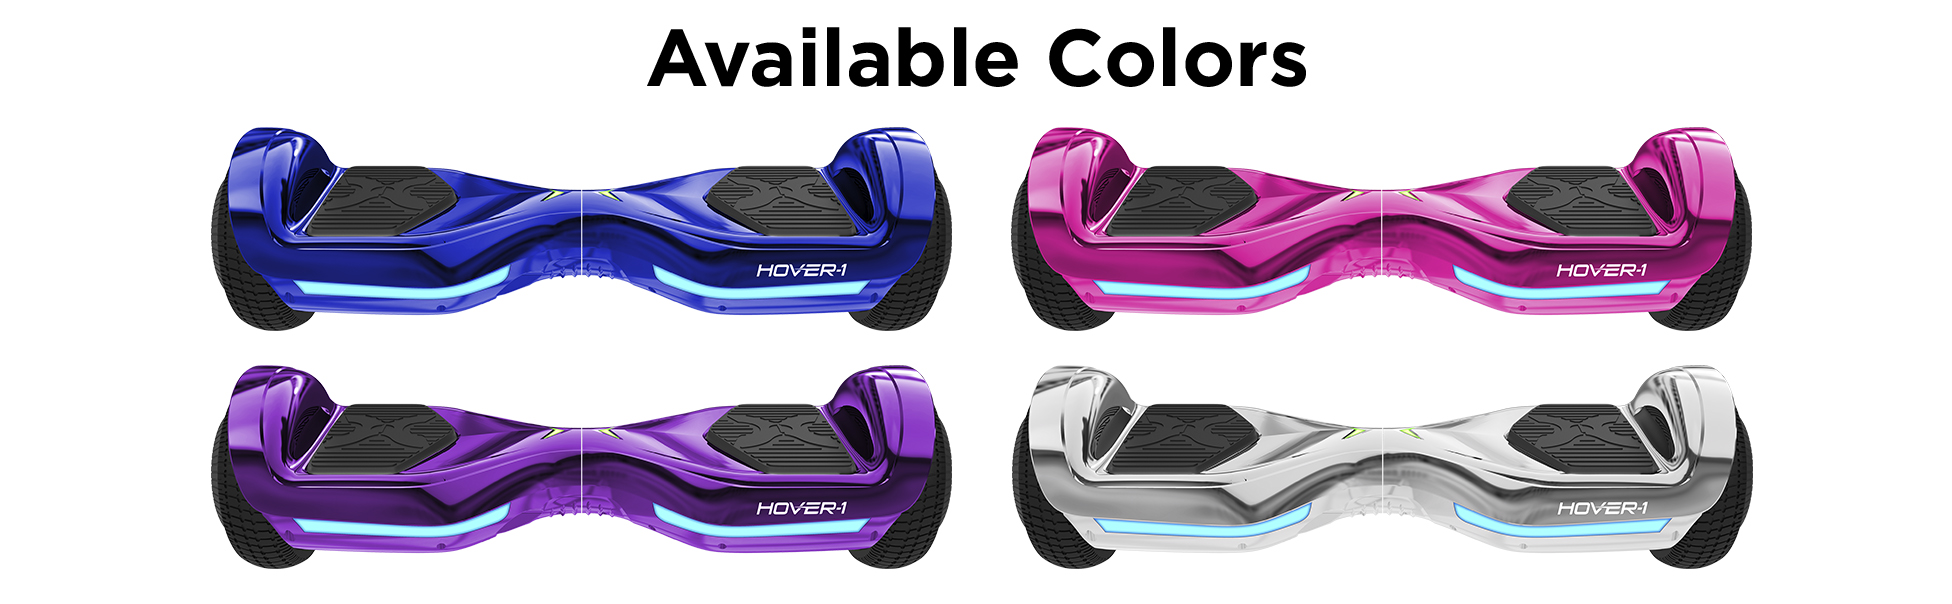 Hover-1 Allstar UL Certified Electric Hoverboard w/ 6.5" Wheels and LED Lights - Pink - image 2 of 6